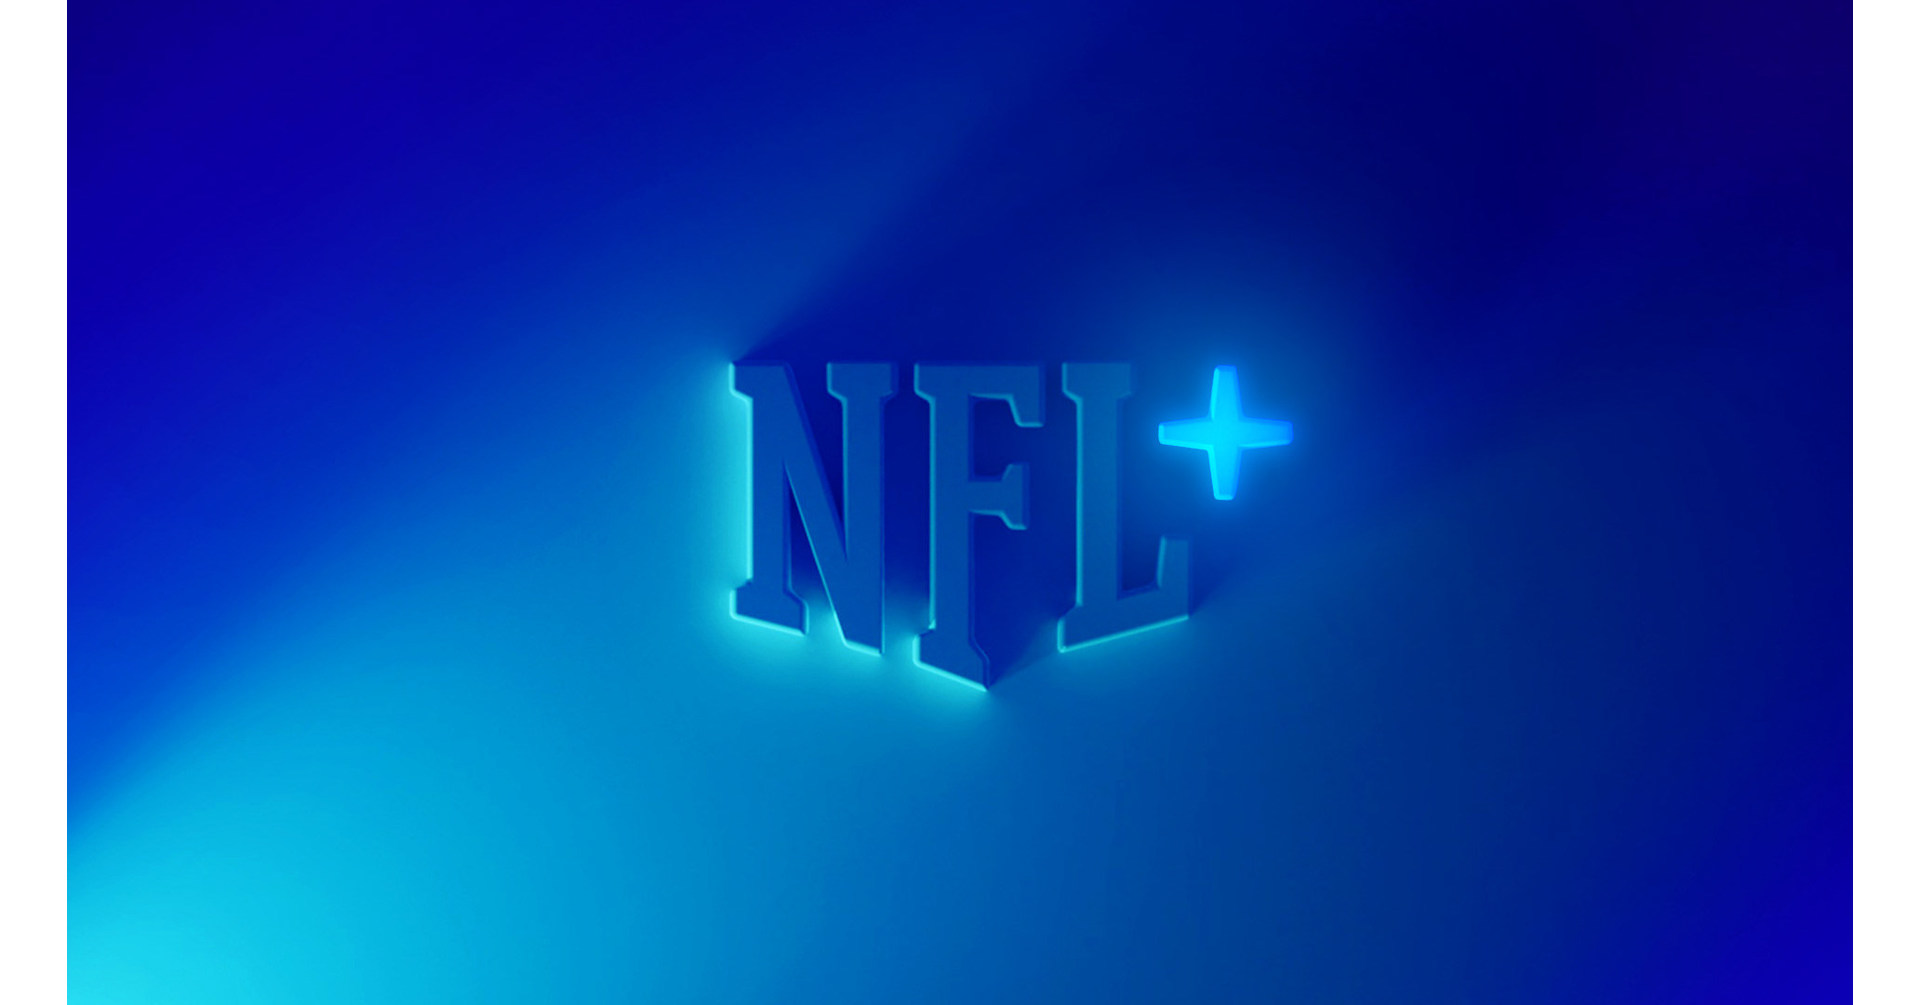 NFL launches exclusive streaming subscription service NFL+